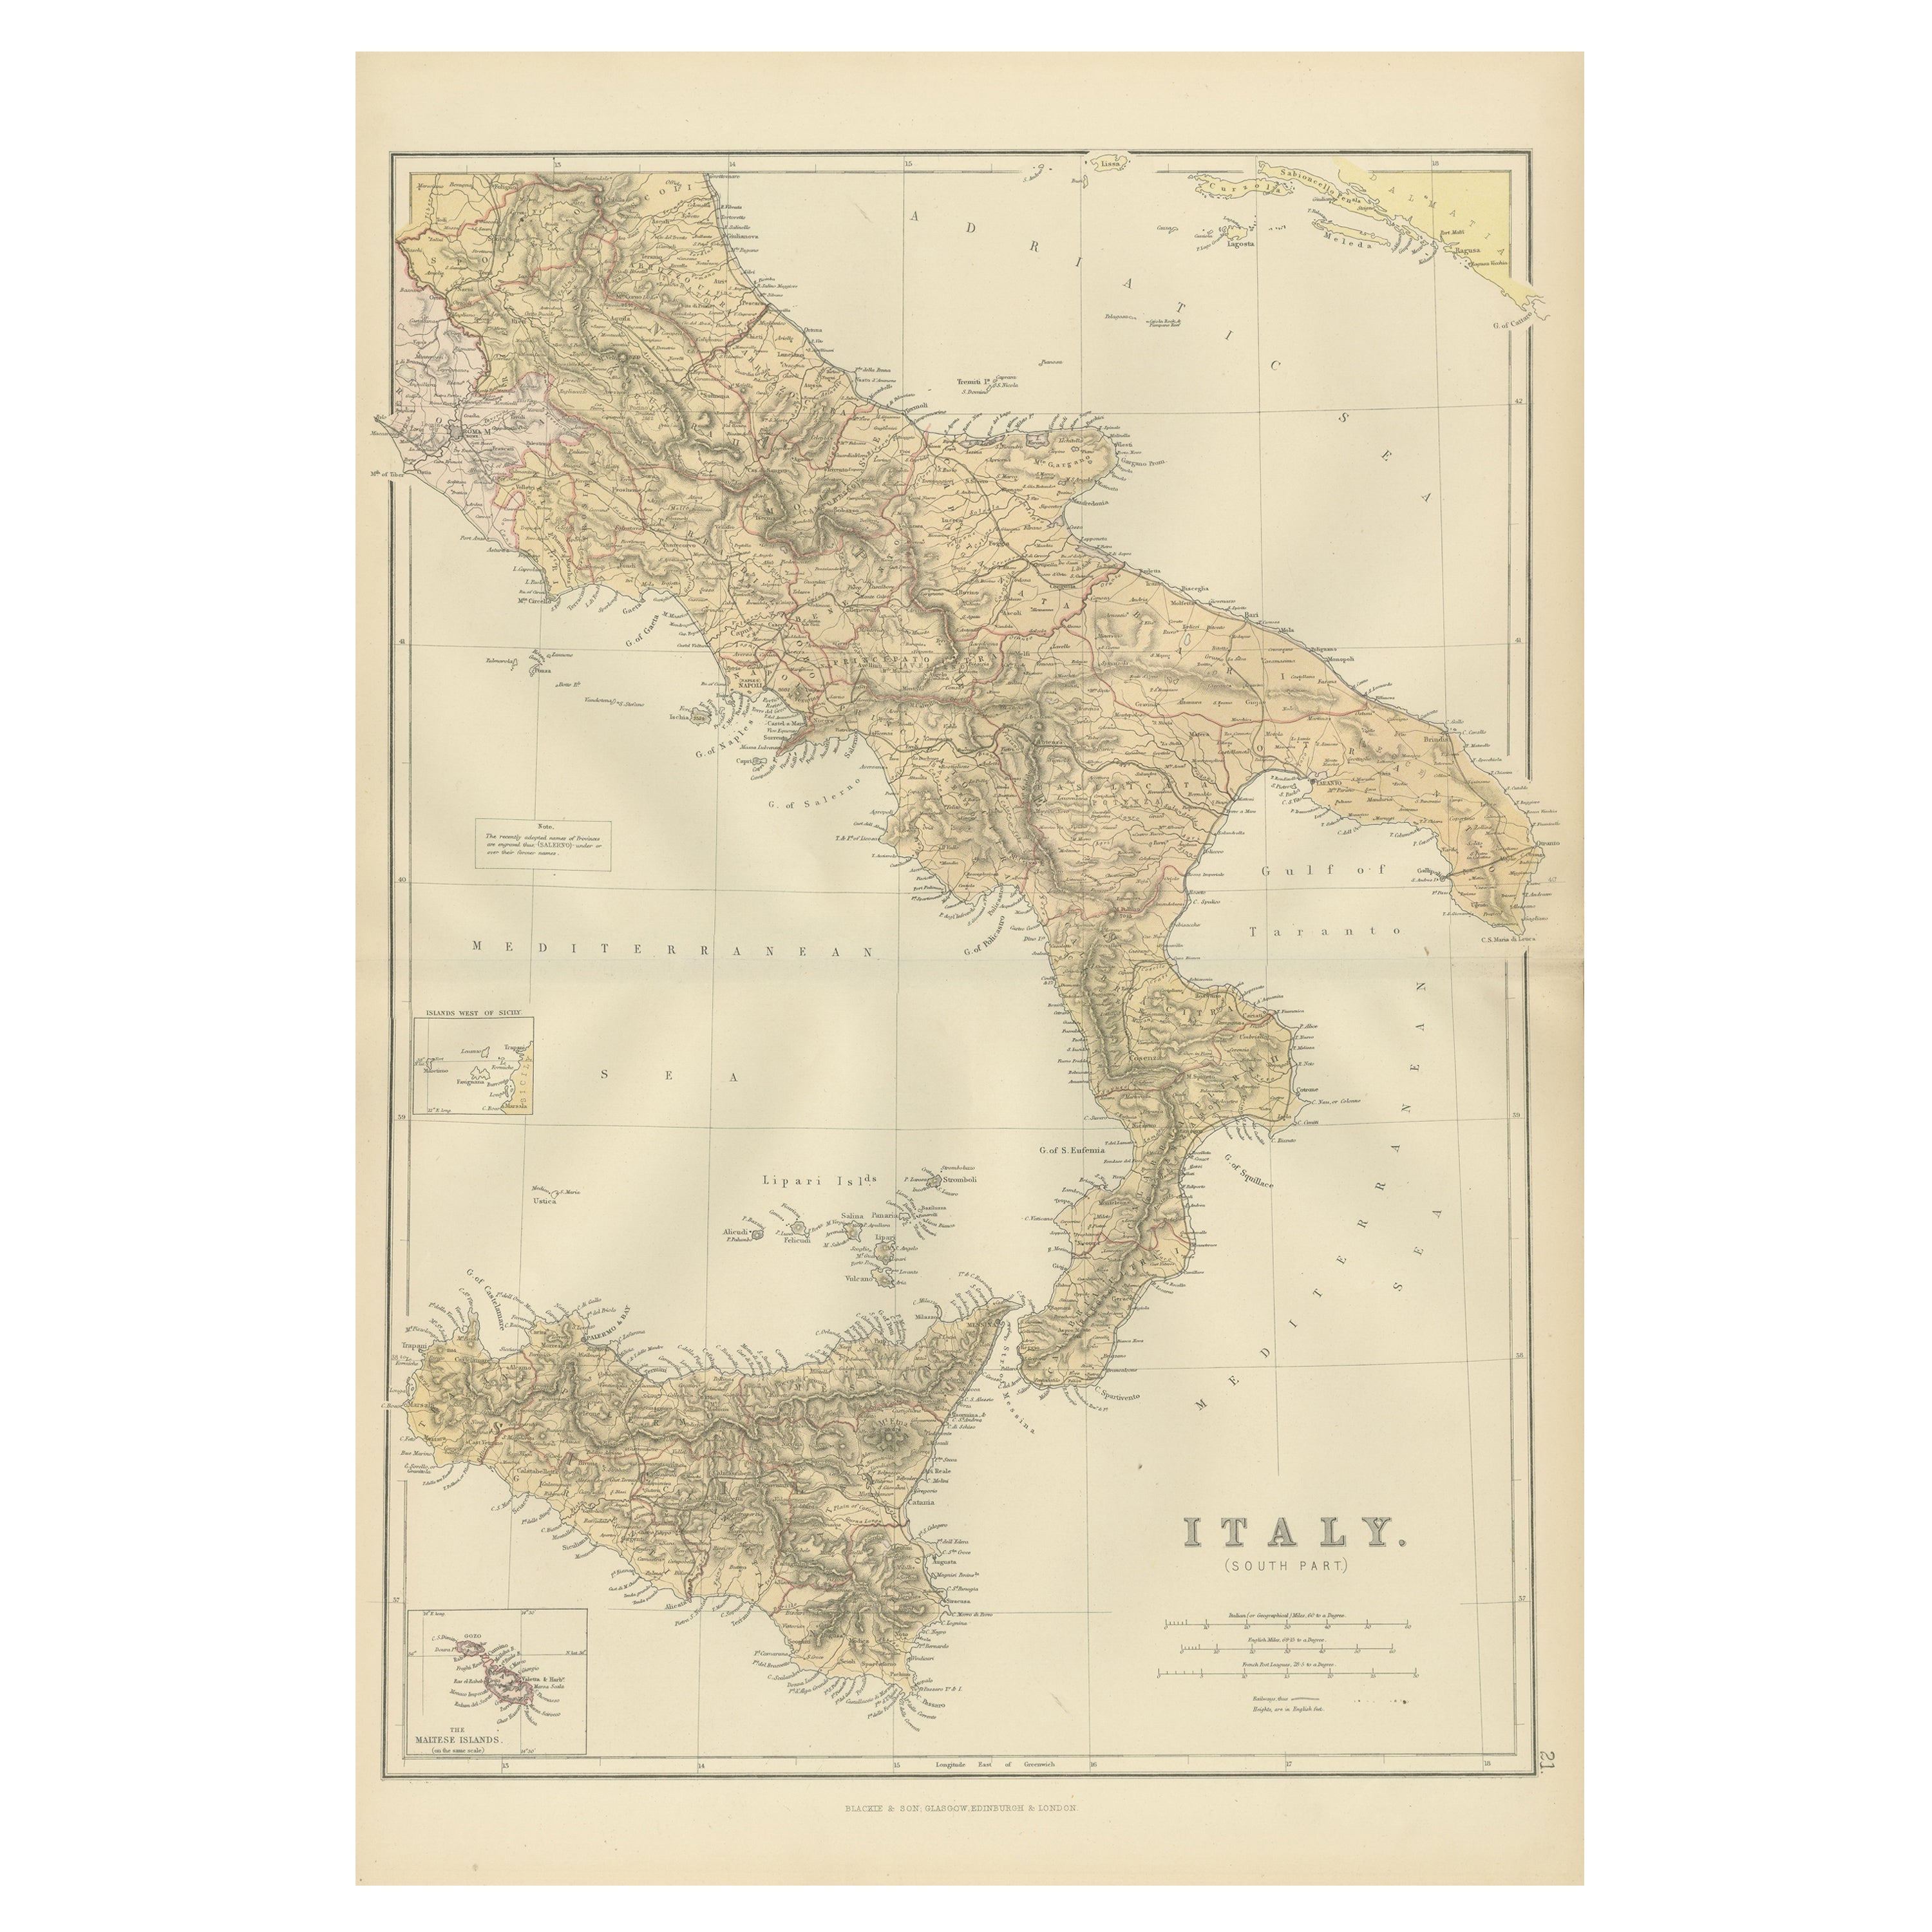 Original Antique Map of the South Part of Italy with an Inset of Malta, 1882